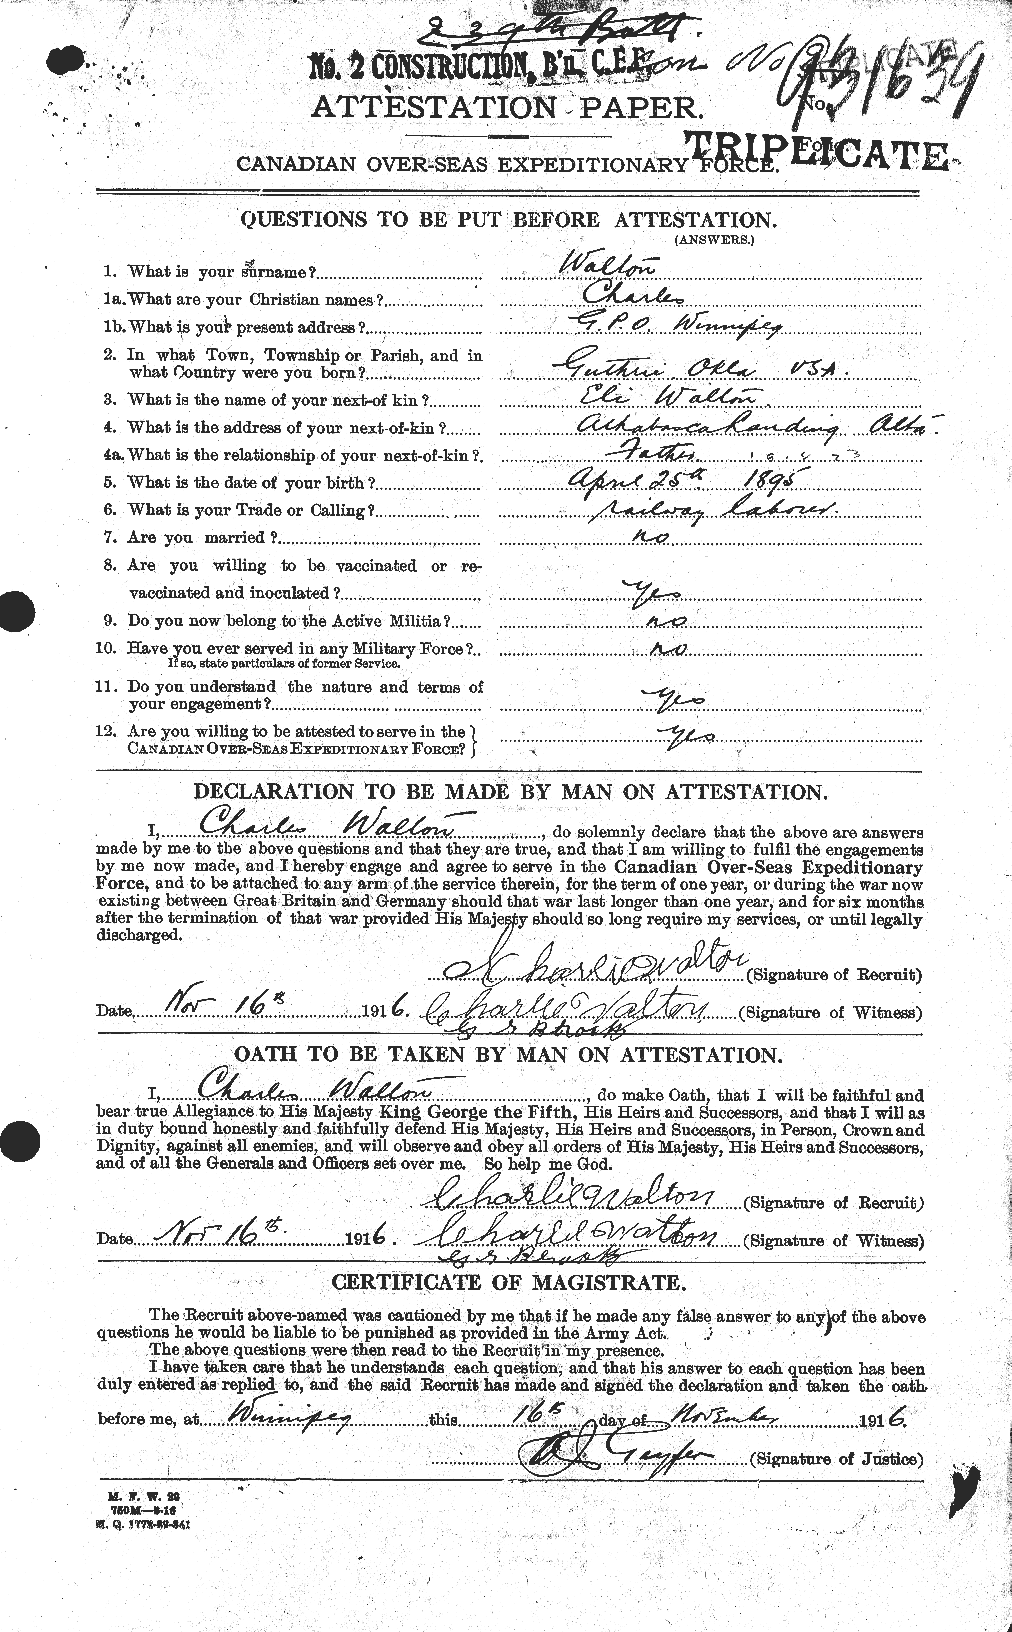 Personnel Records of the First World War - CEF 655527a